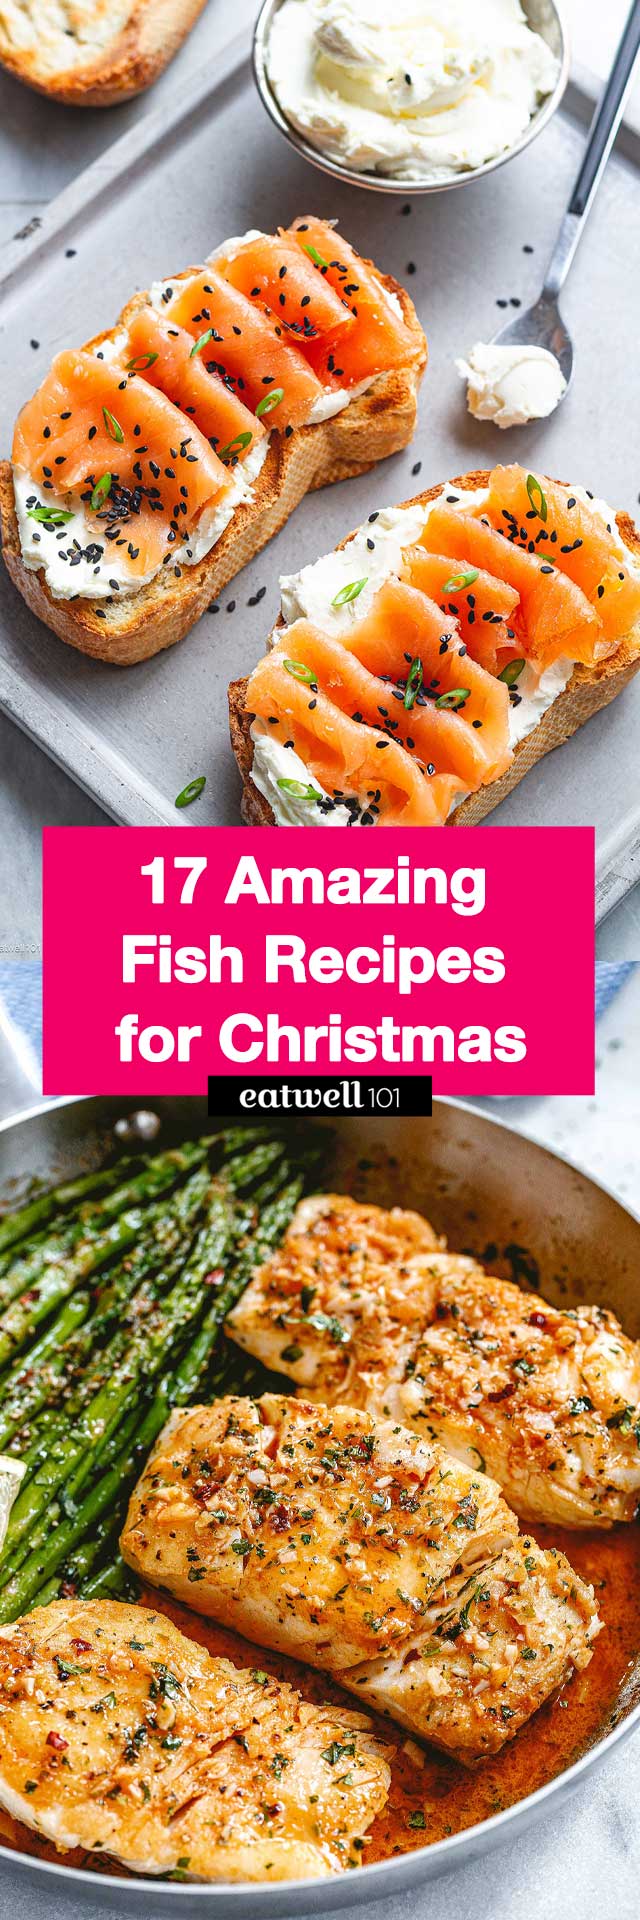 Christmas Fish Recipes - #christmas #fish #recipes #eatwell101 - These Christmas fish recipes are fantastic options for a lighter and healthier holiday dinner!